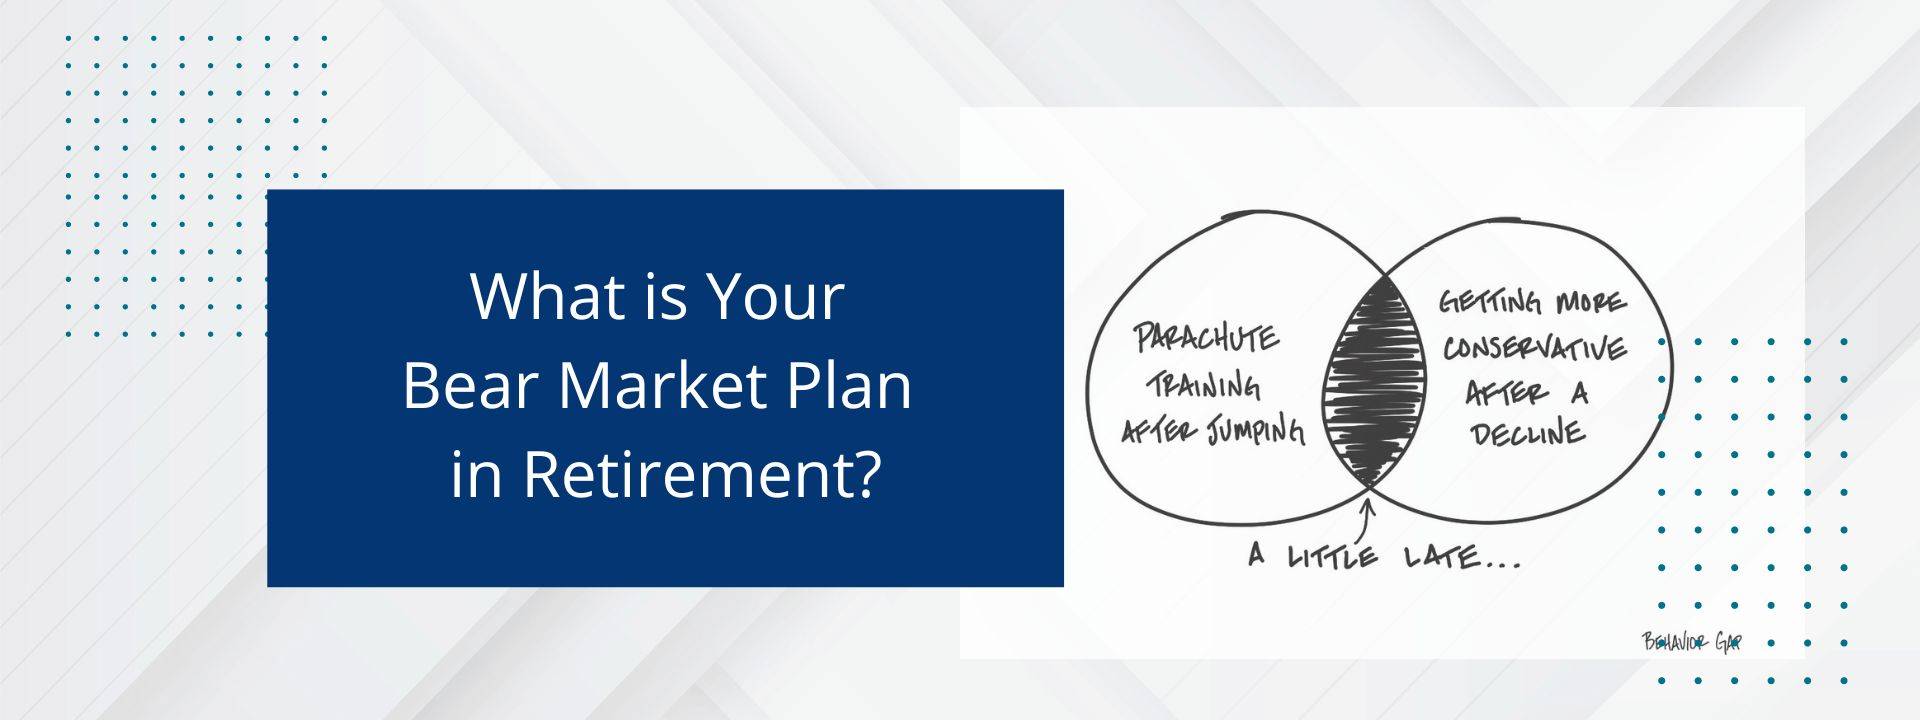 What is your Bear Market Plan in Retirement?